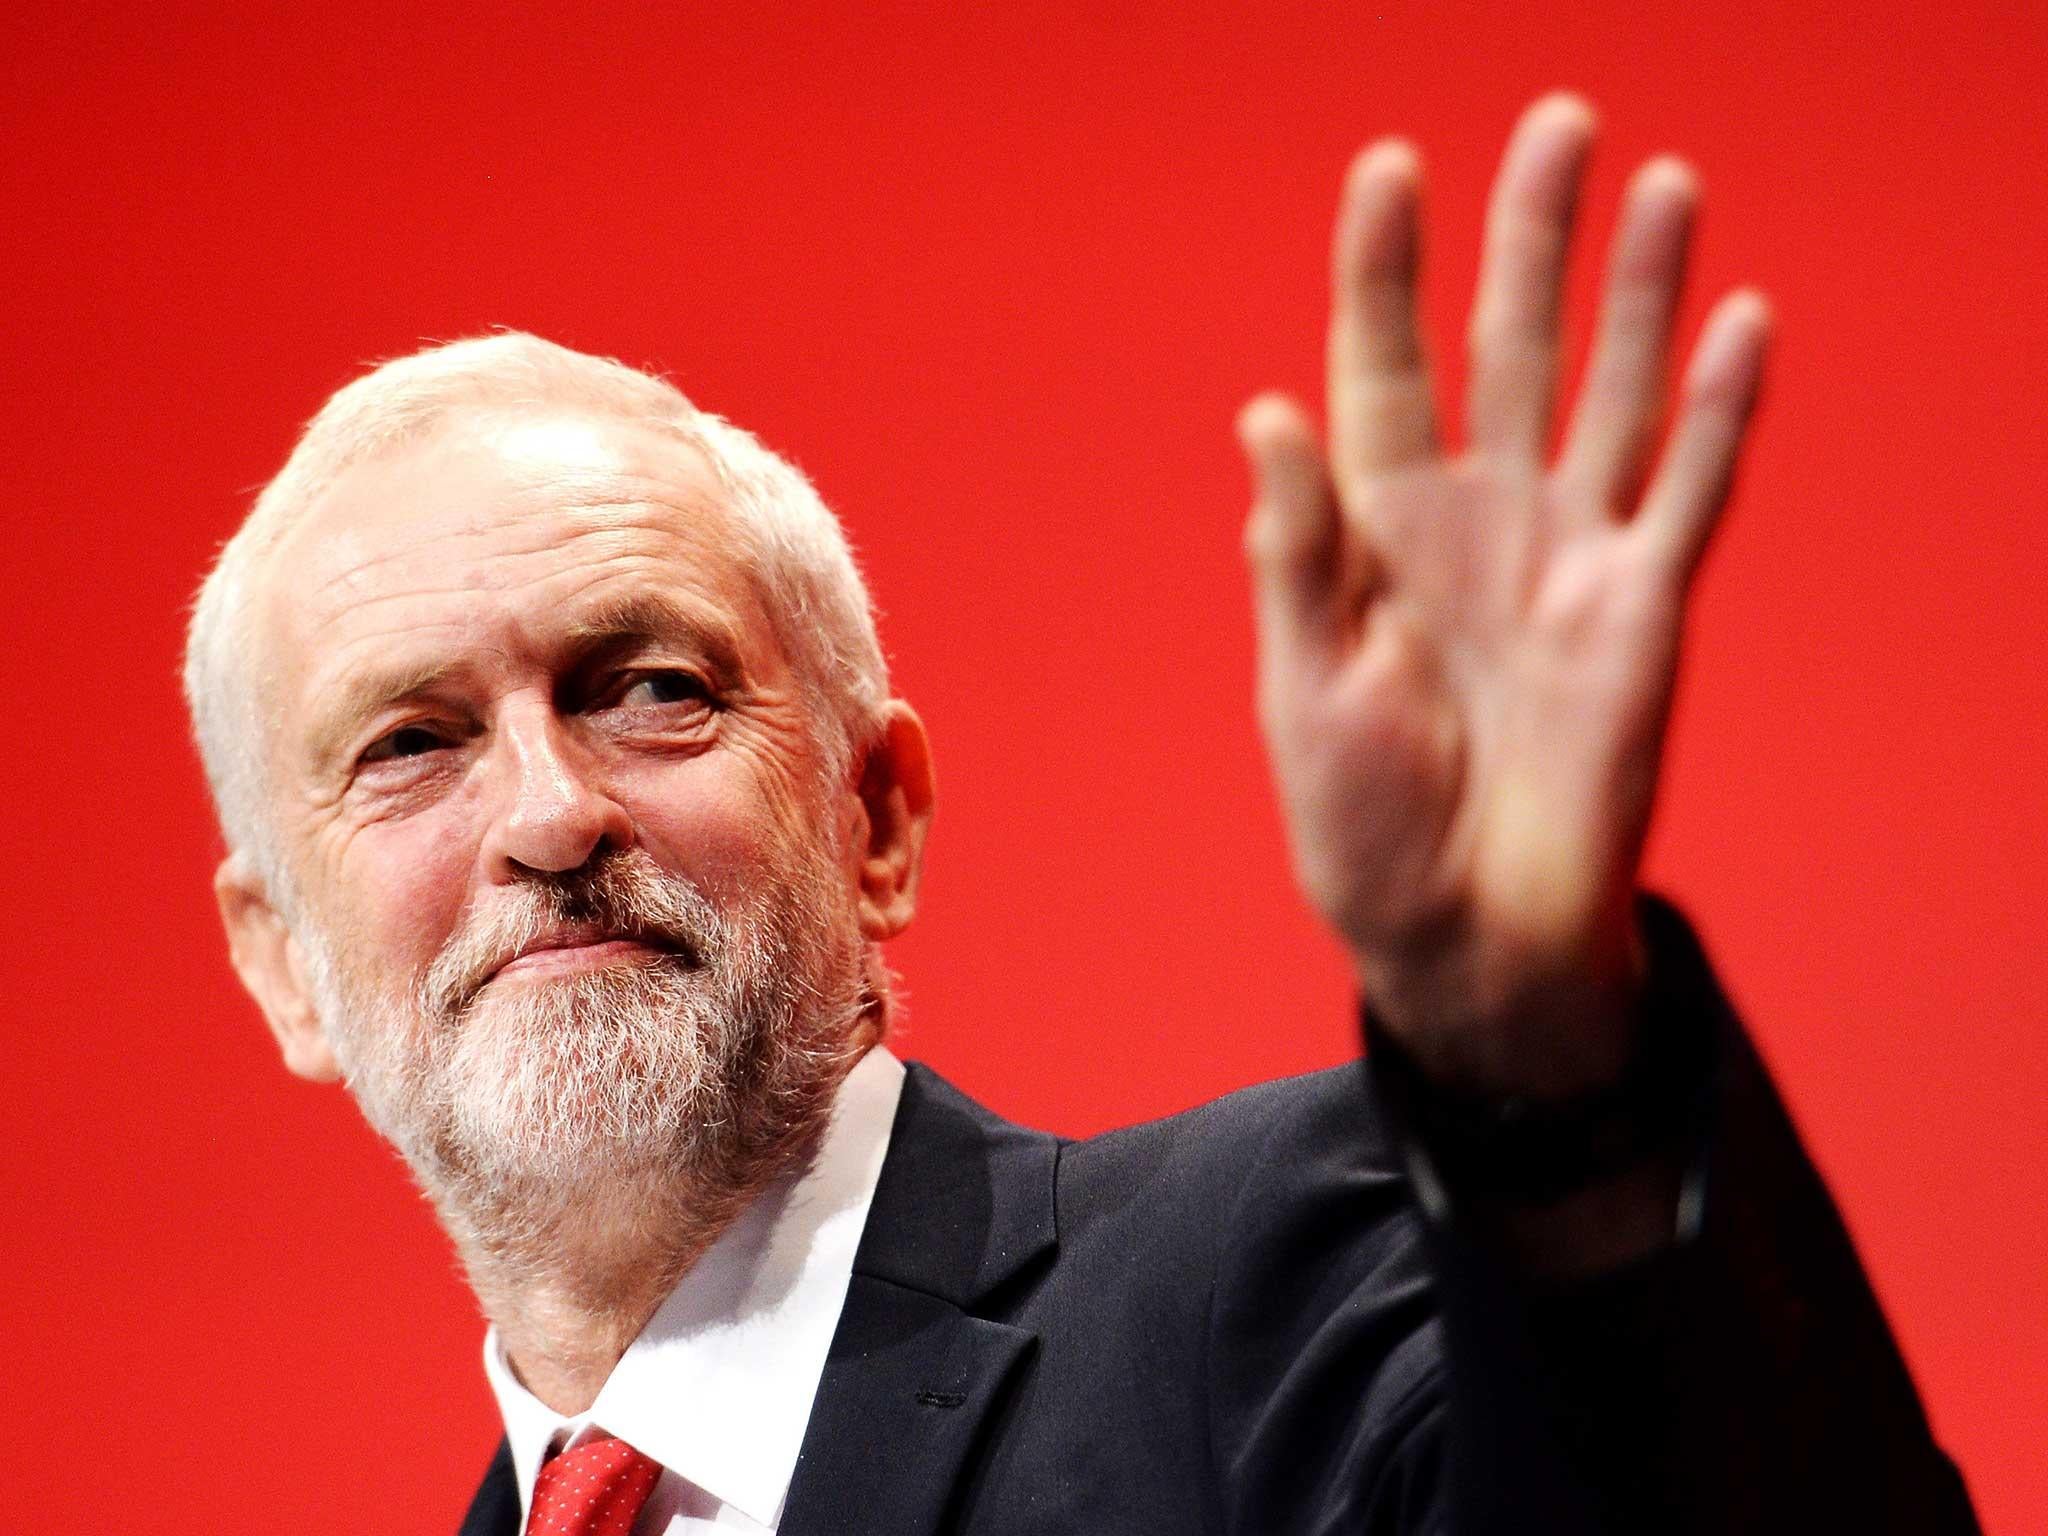 The Labour leader made clear it was not an attempt to overturn the result of the referendum